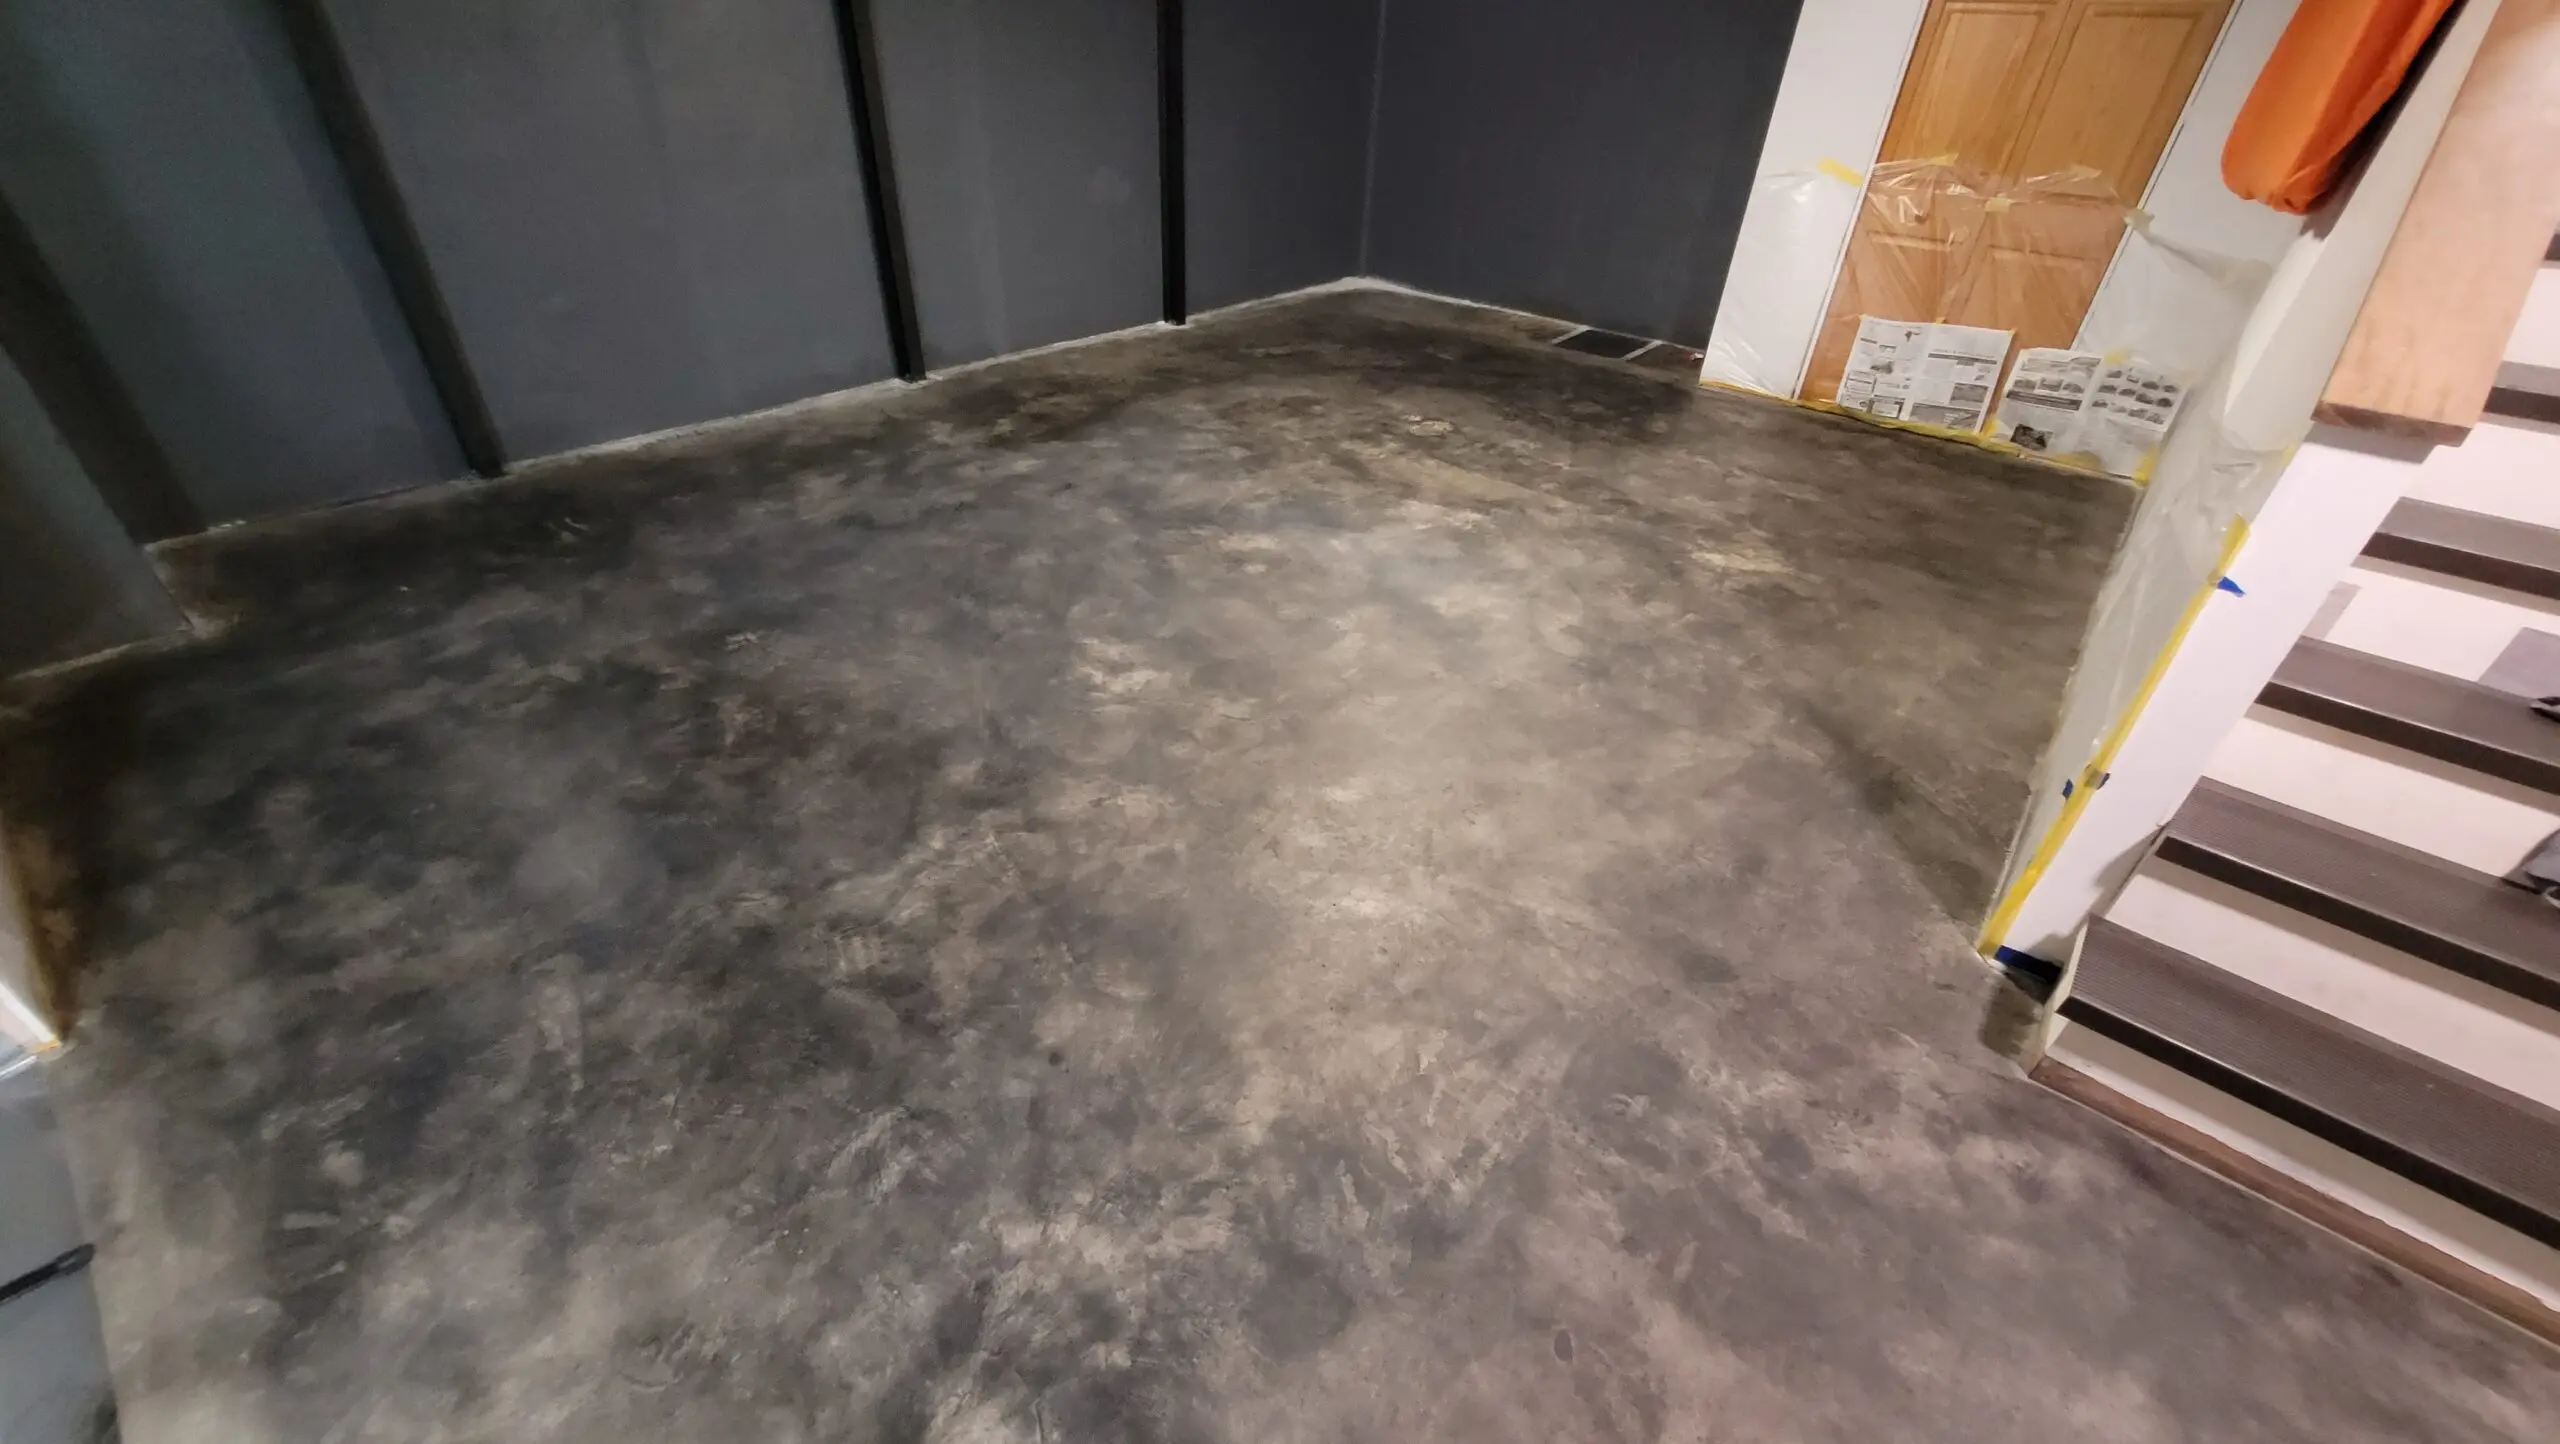 Black stained concrete basement floor during the staining process, with Bissell SpinWave mop swirls, working towards achieving the desired stone-like appearance.